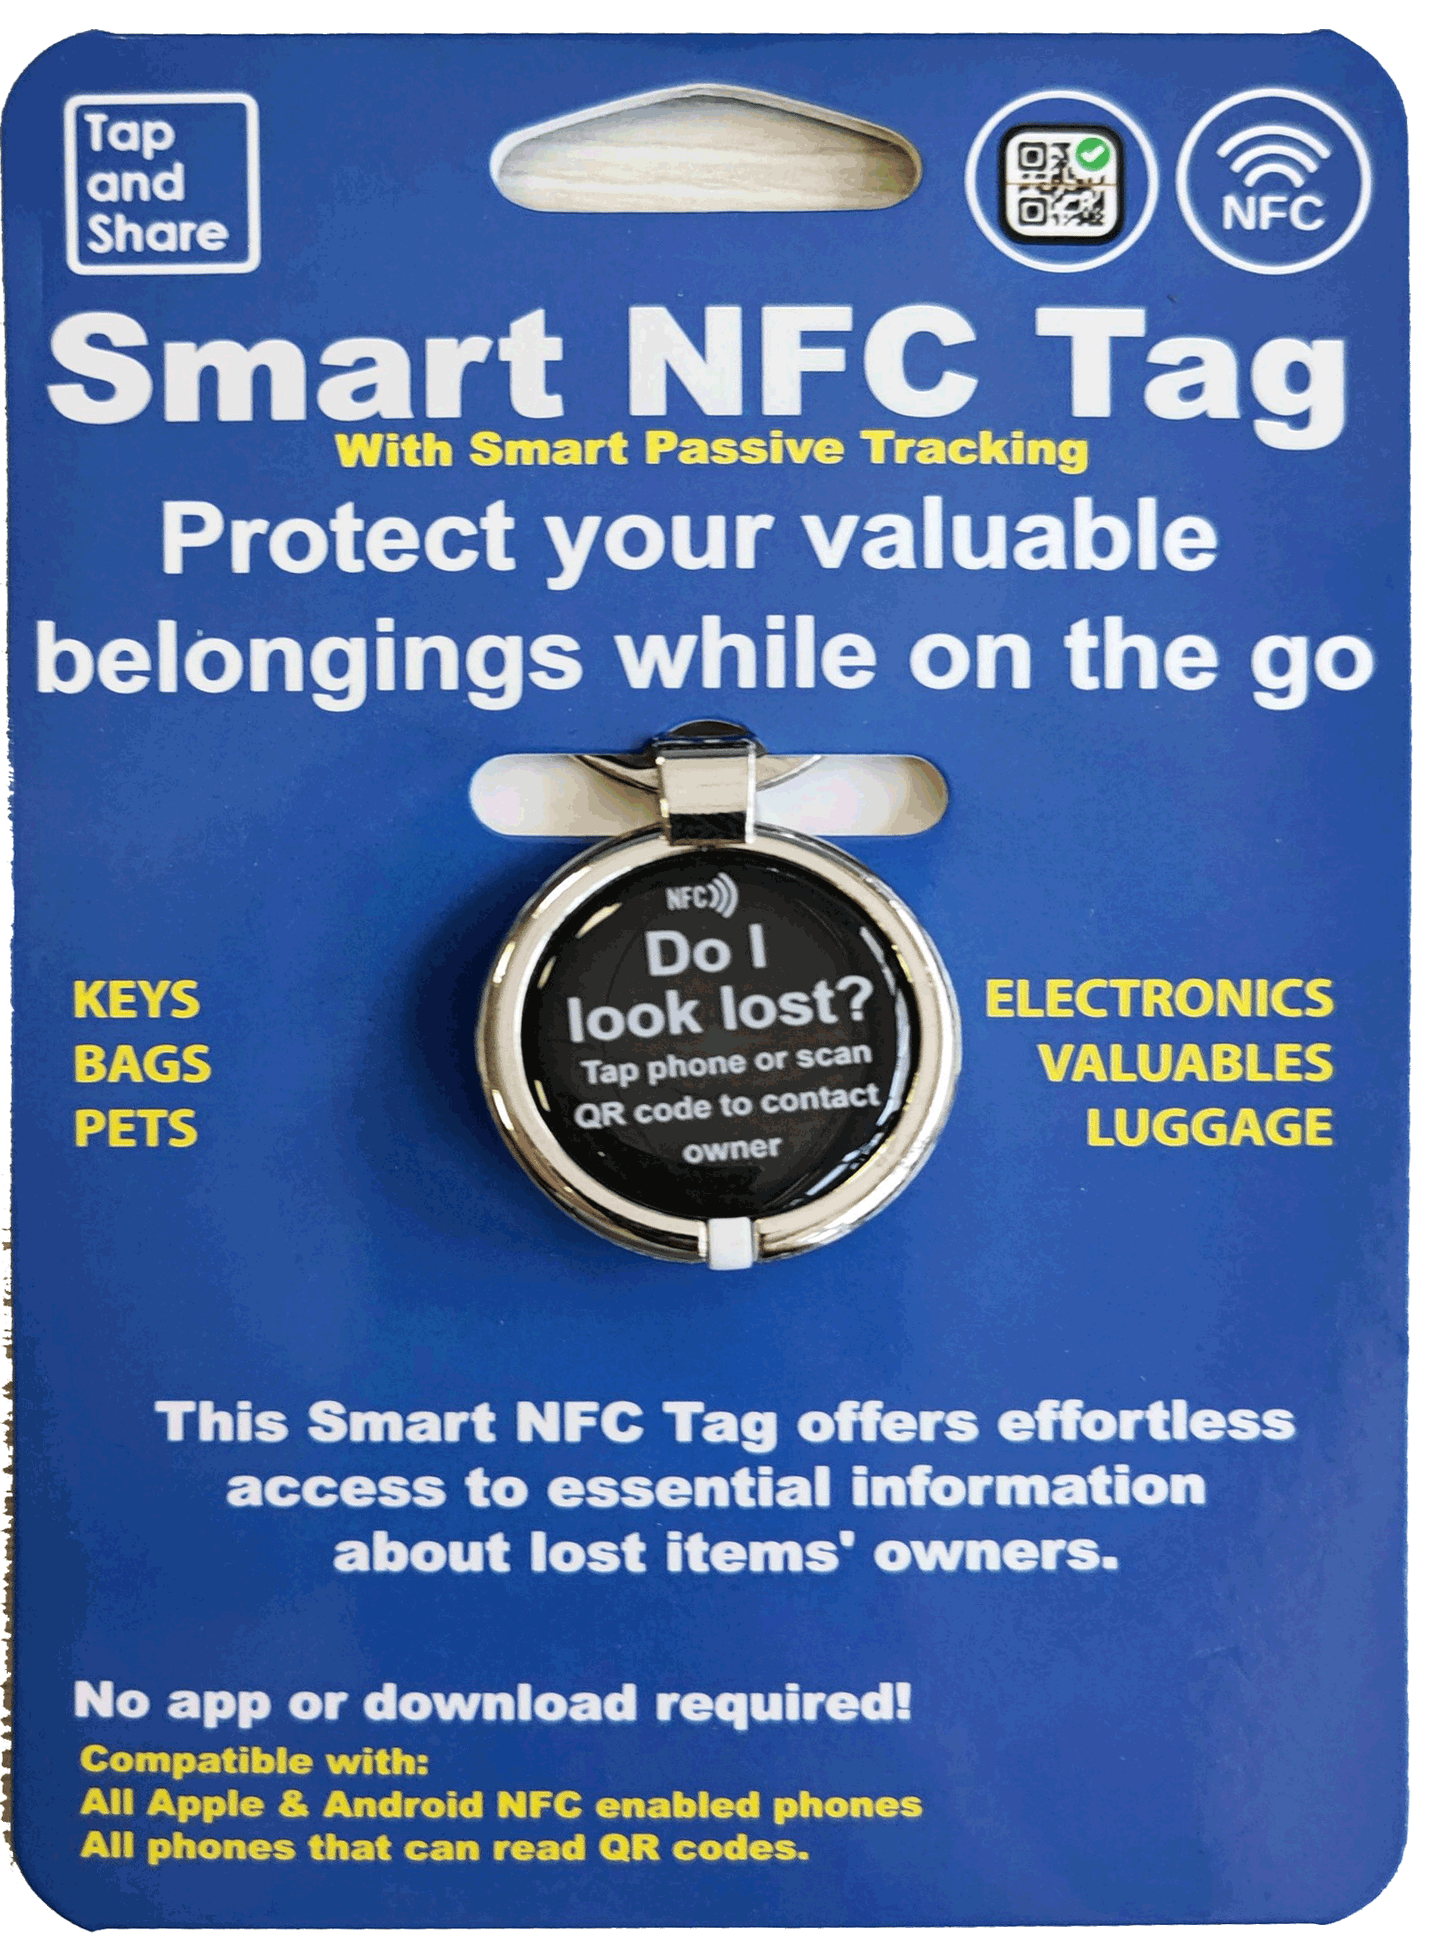 NFC tags for heavy-duty use (industry, tracking etc) : r/NFC